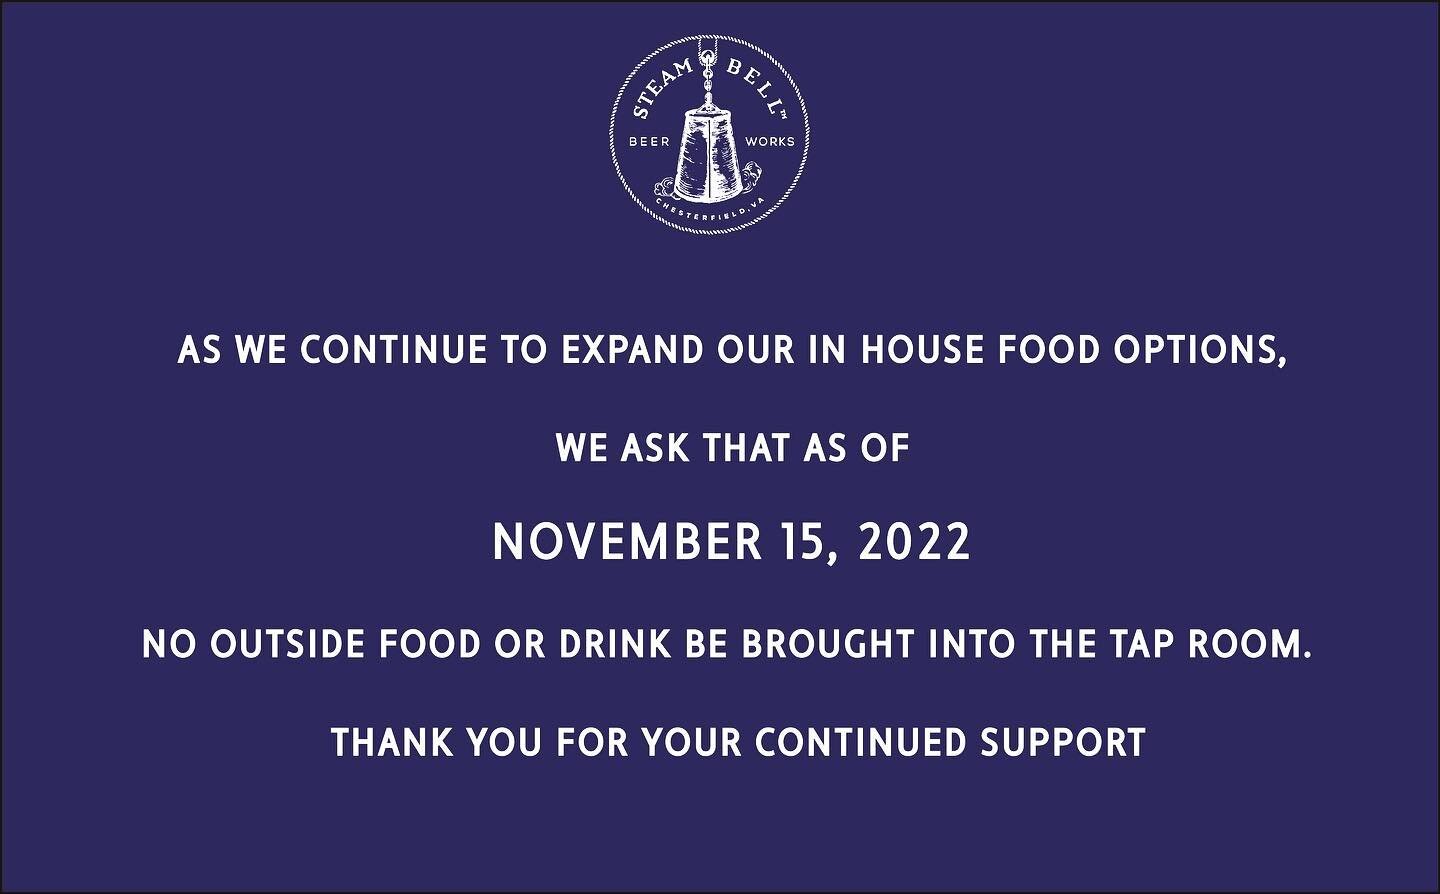 Thank you for your continued support of our growing business! Just a friendly reminder that as of November 15, 2022, we will no longer be allowing outside food. Stay tuned for our revamped menu featuring delicious new options for everyone!
.
.
.
.
.
